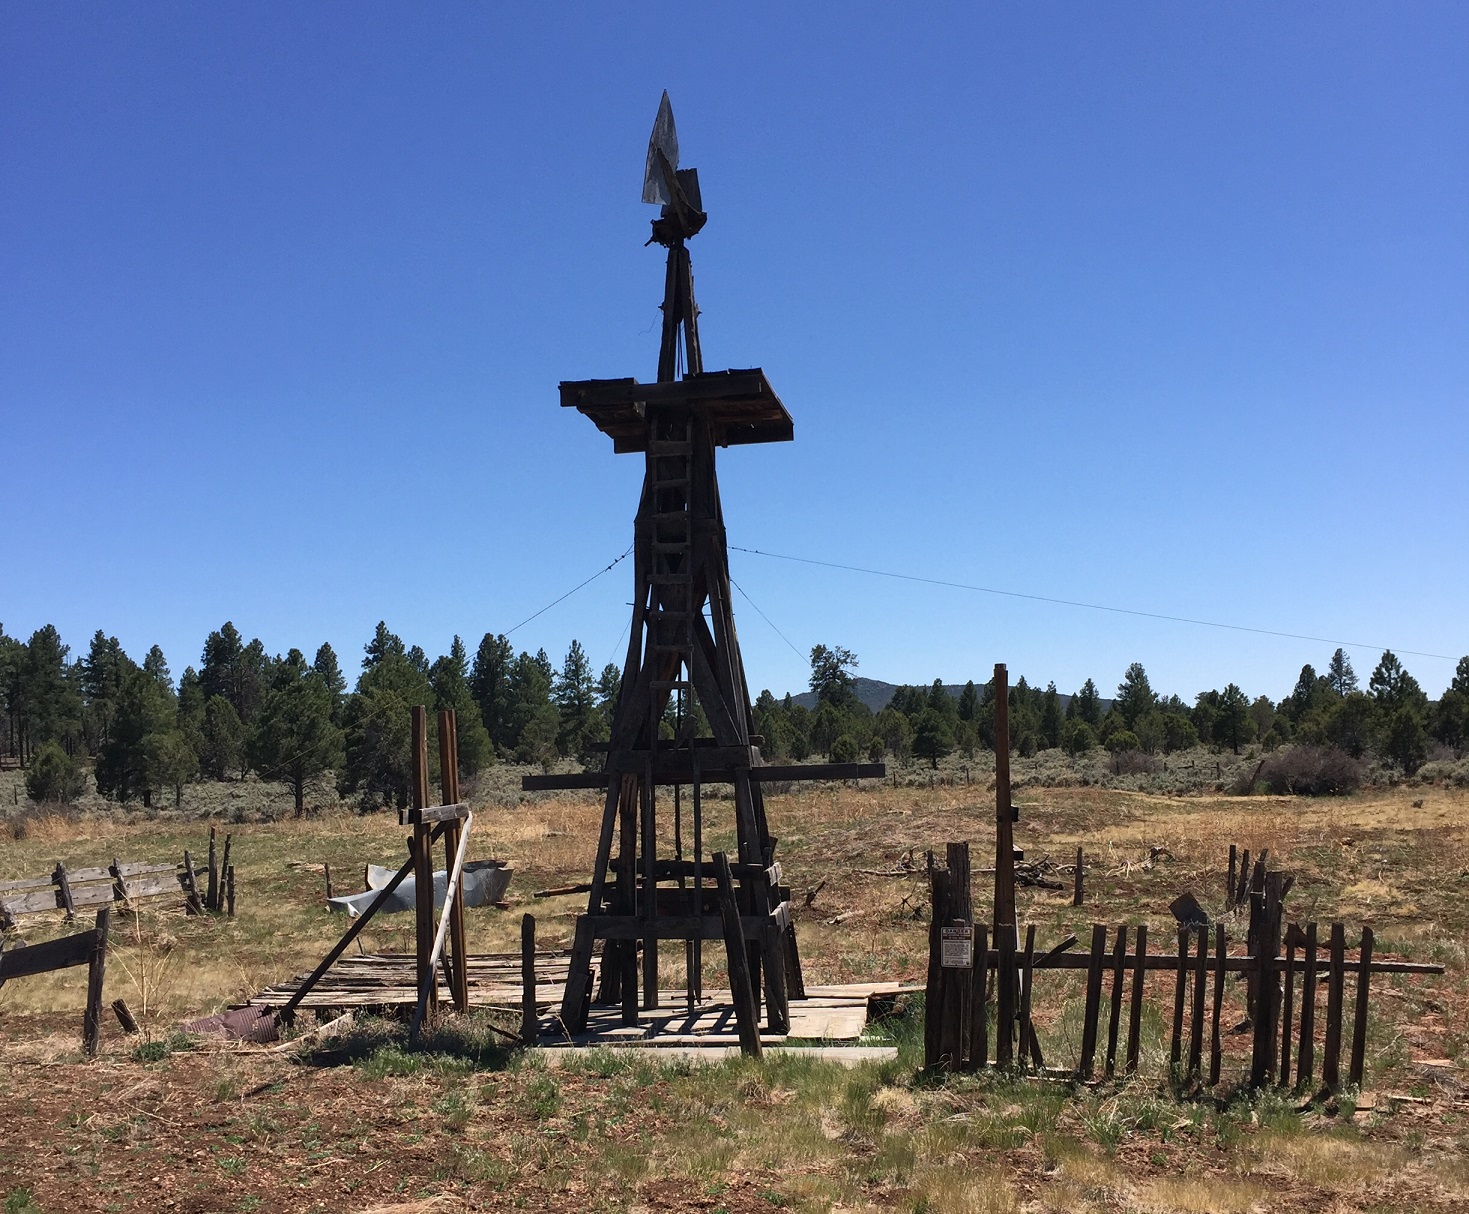 A windmill at the Pine Cabin with Mt. Dellenbaugh in the background